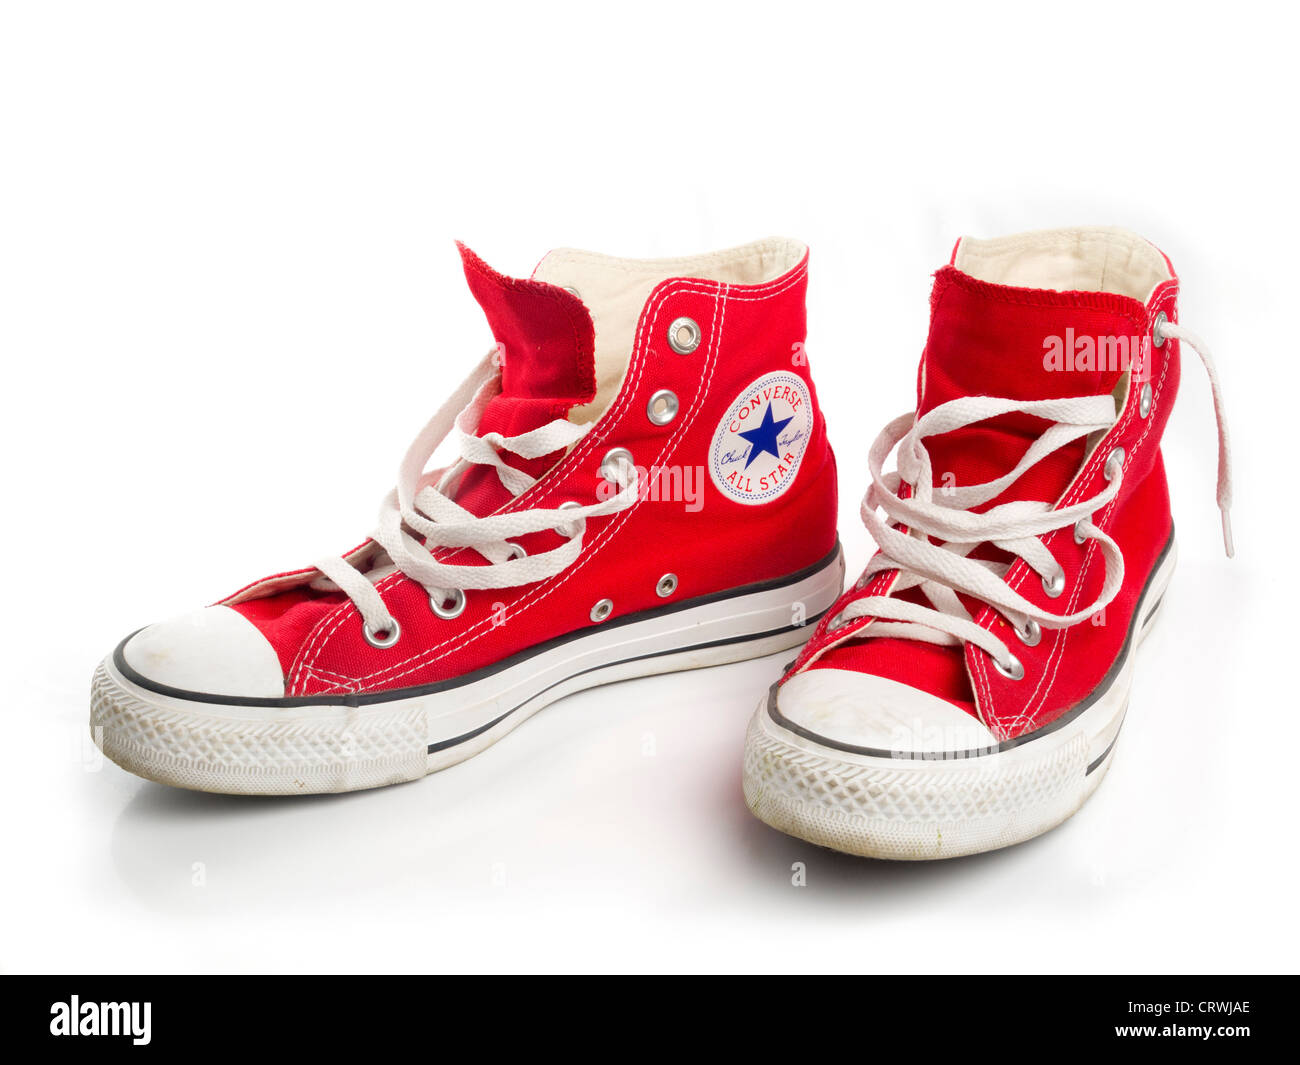 Red Converse Chuck Taylor All Star shoe pair Stock Photo